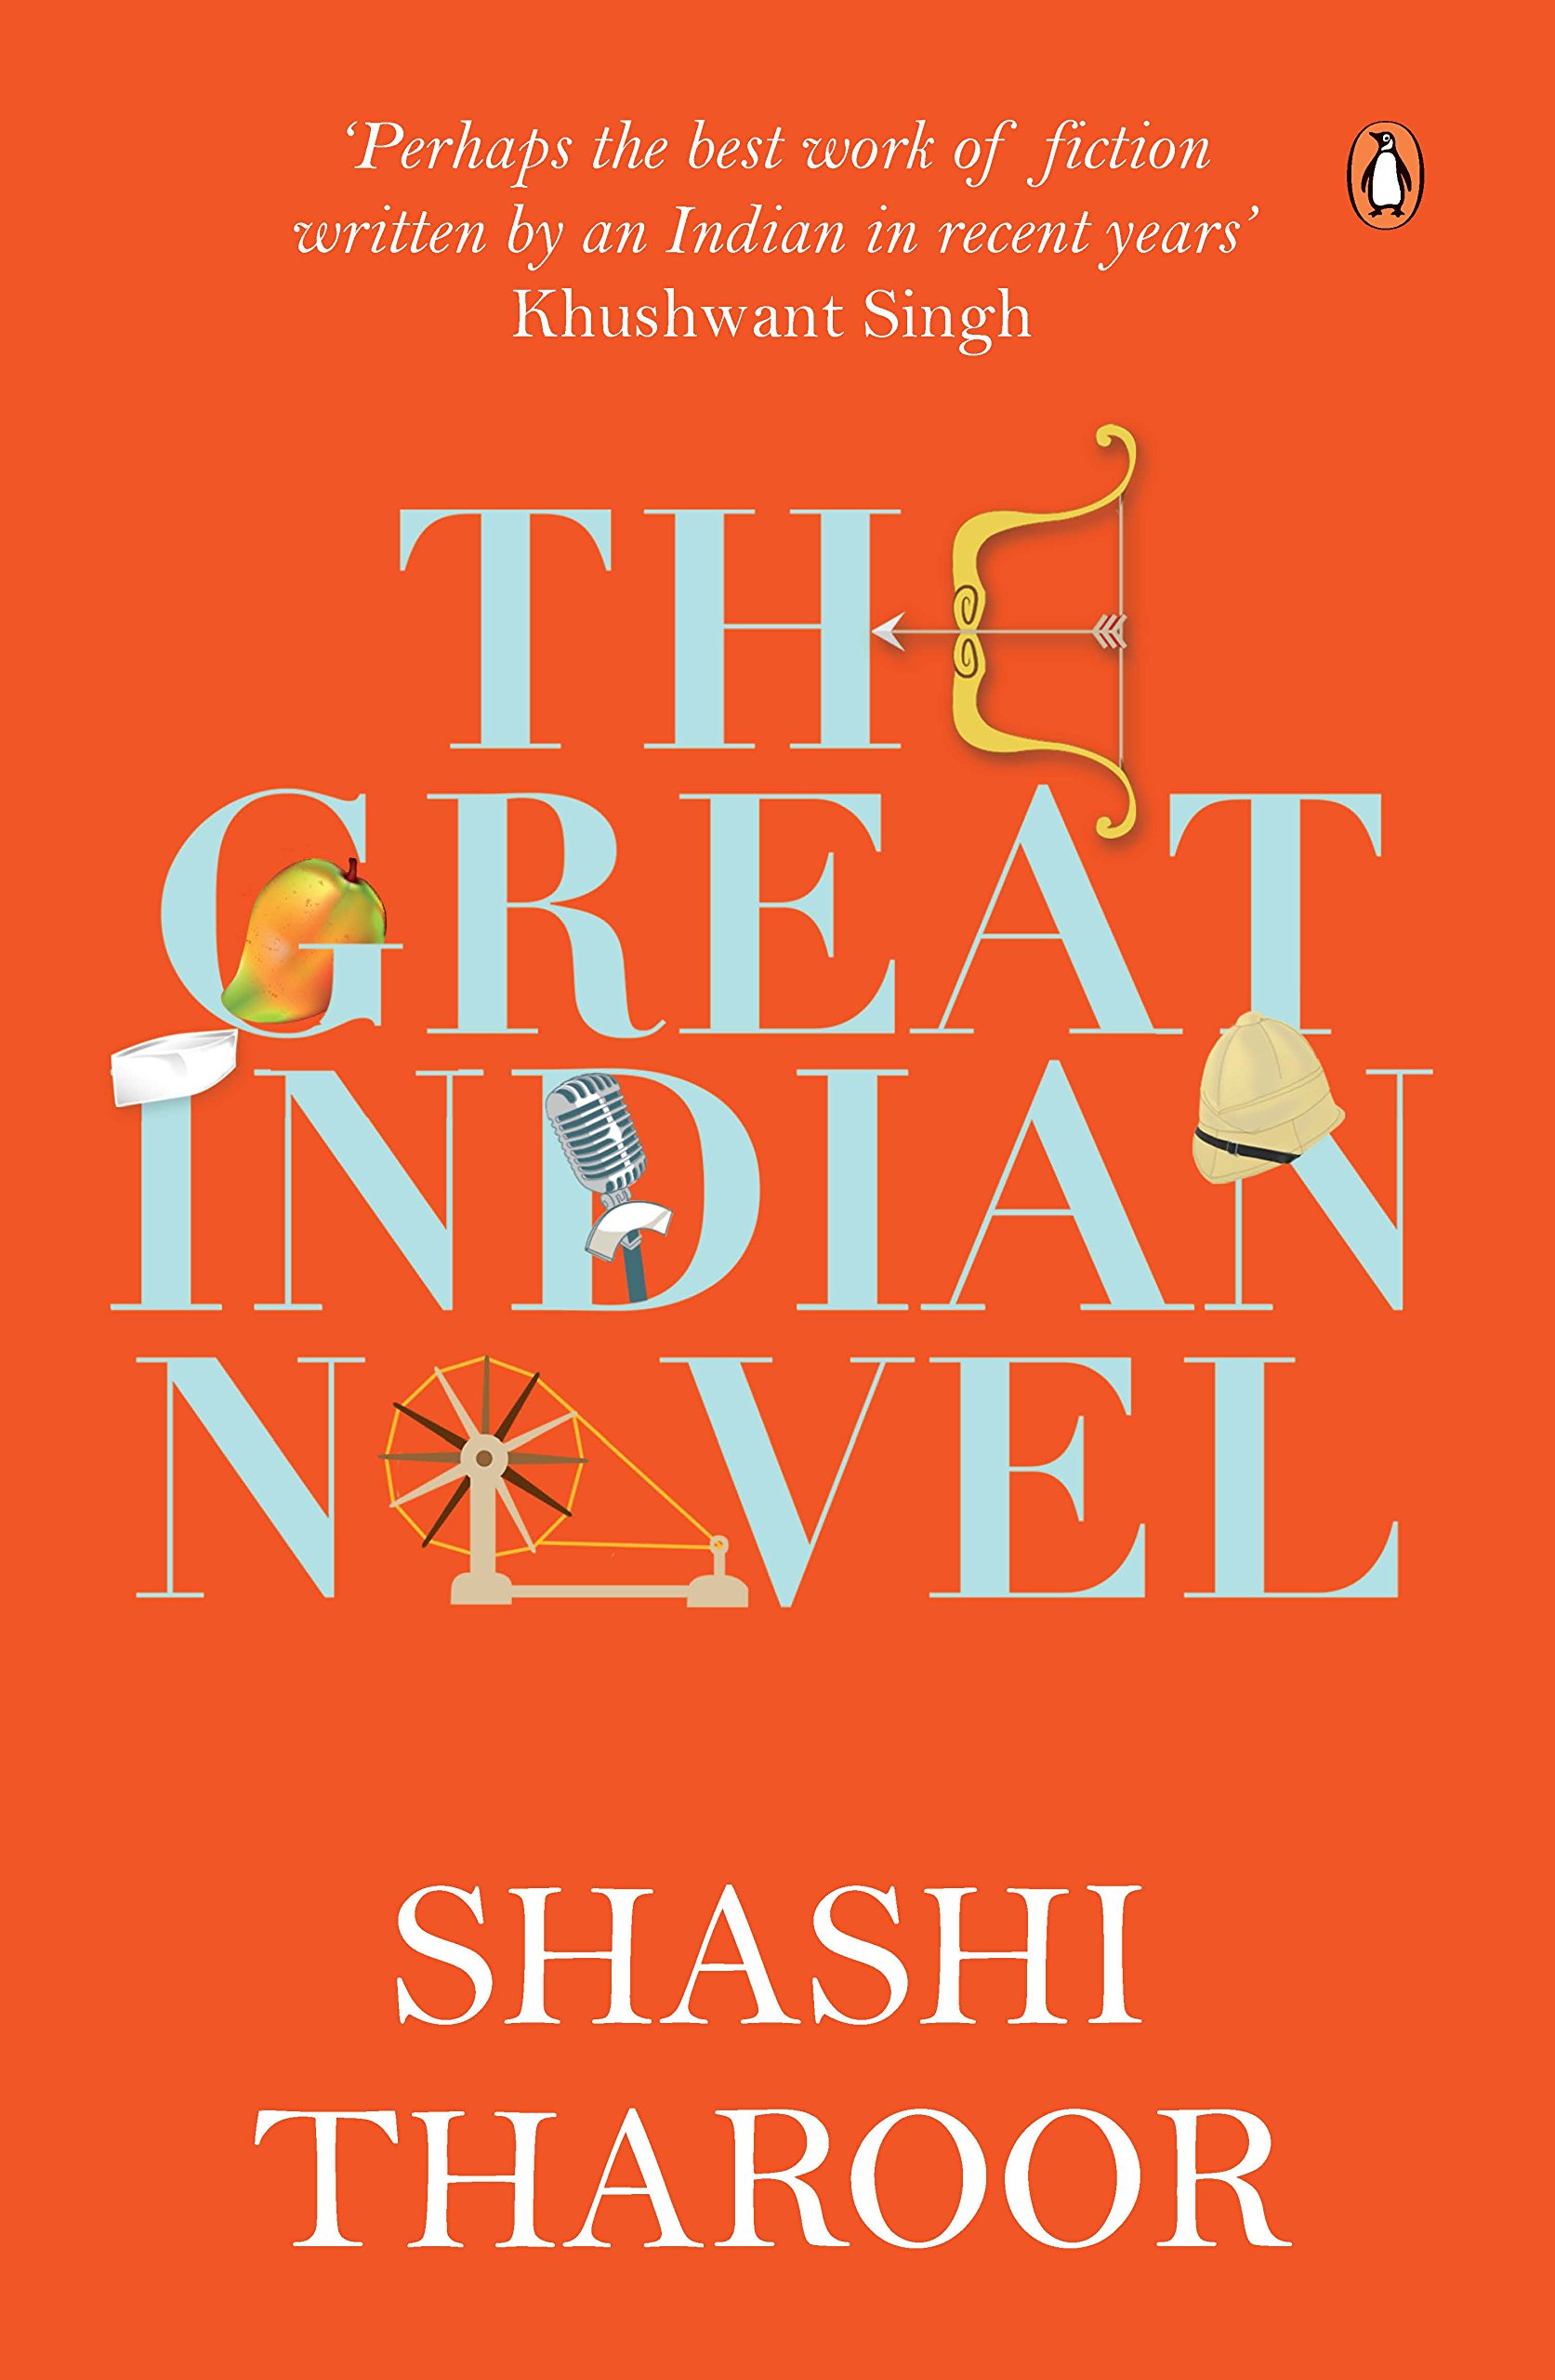 15 Best-Selling Books Of All Time By Indian Authors That You Should Read